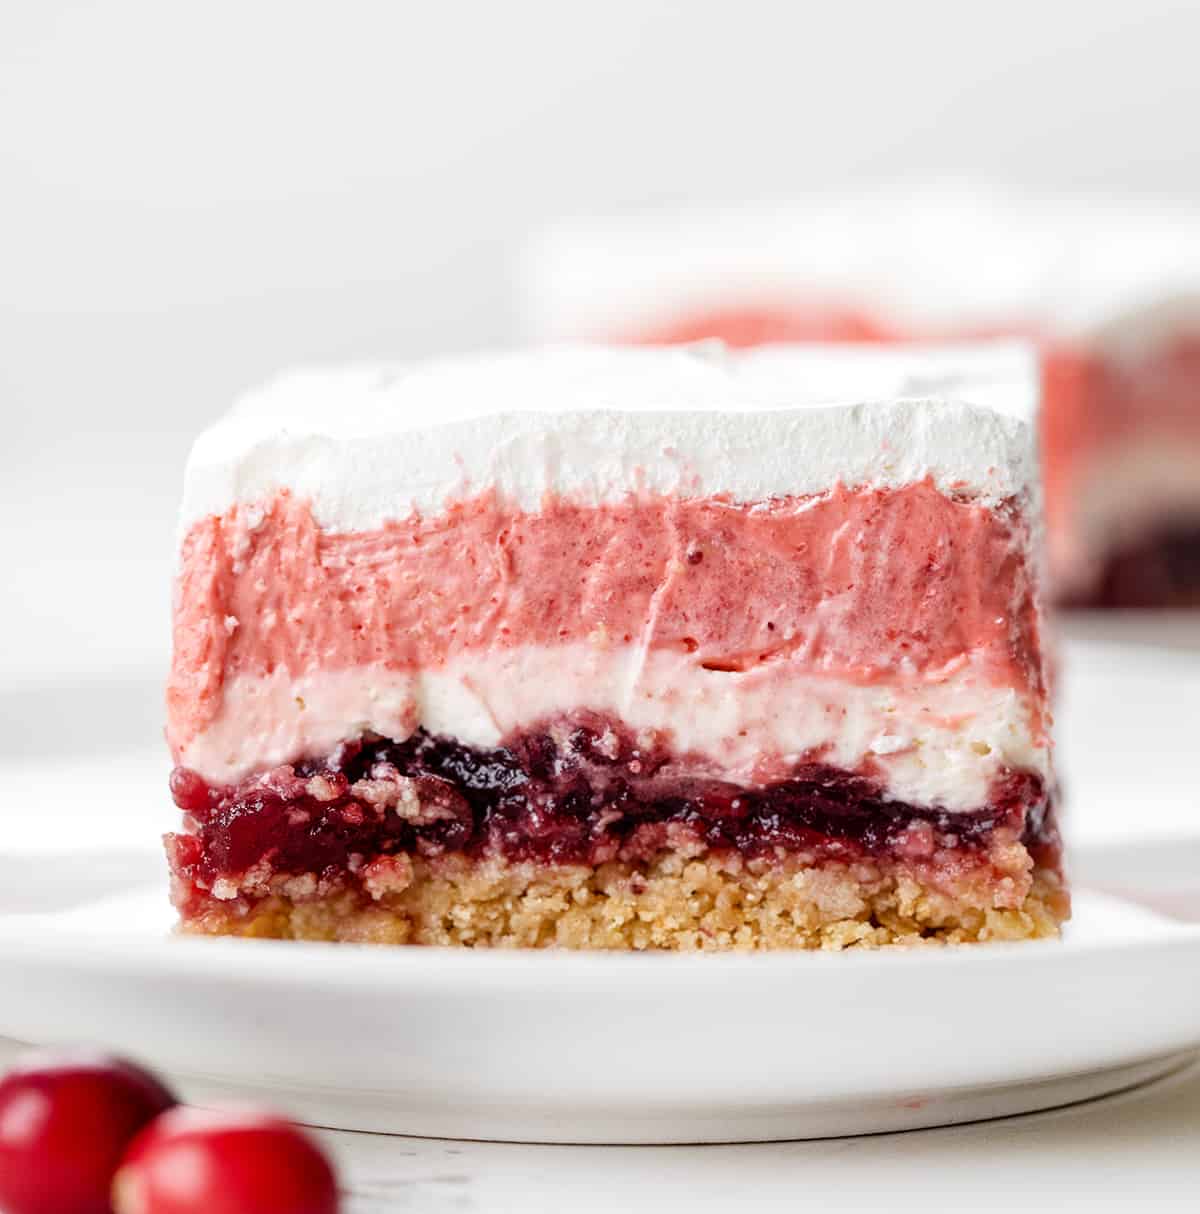 One piece of Cranberry Delight on a white plate showing layers.